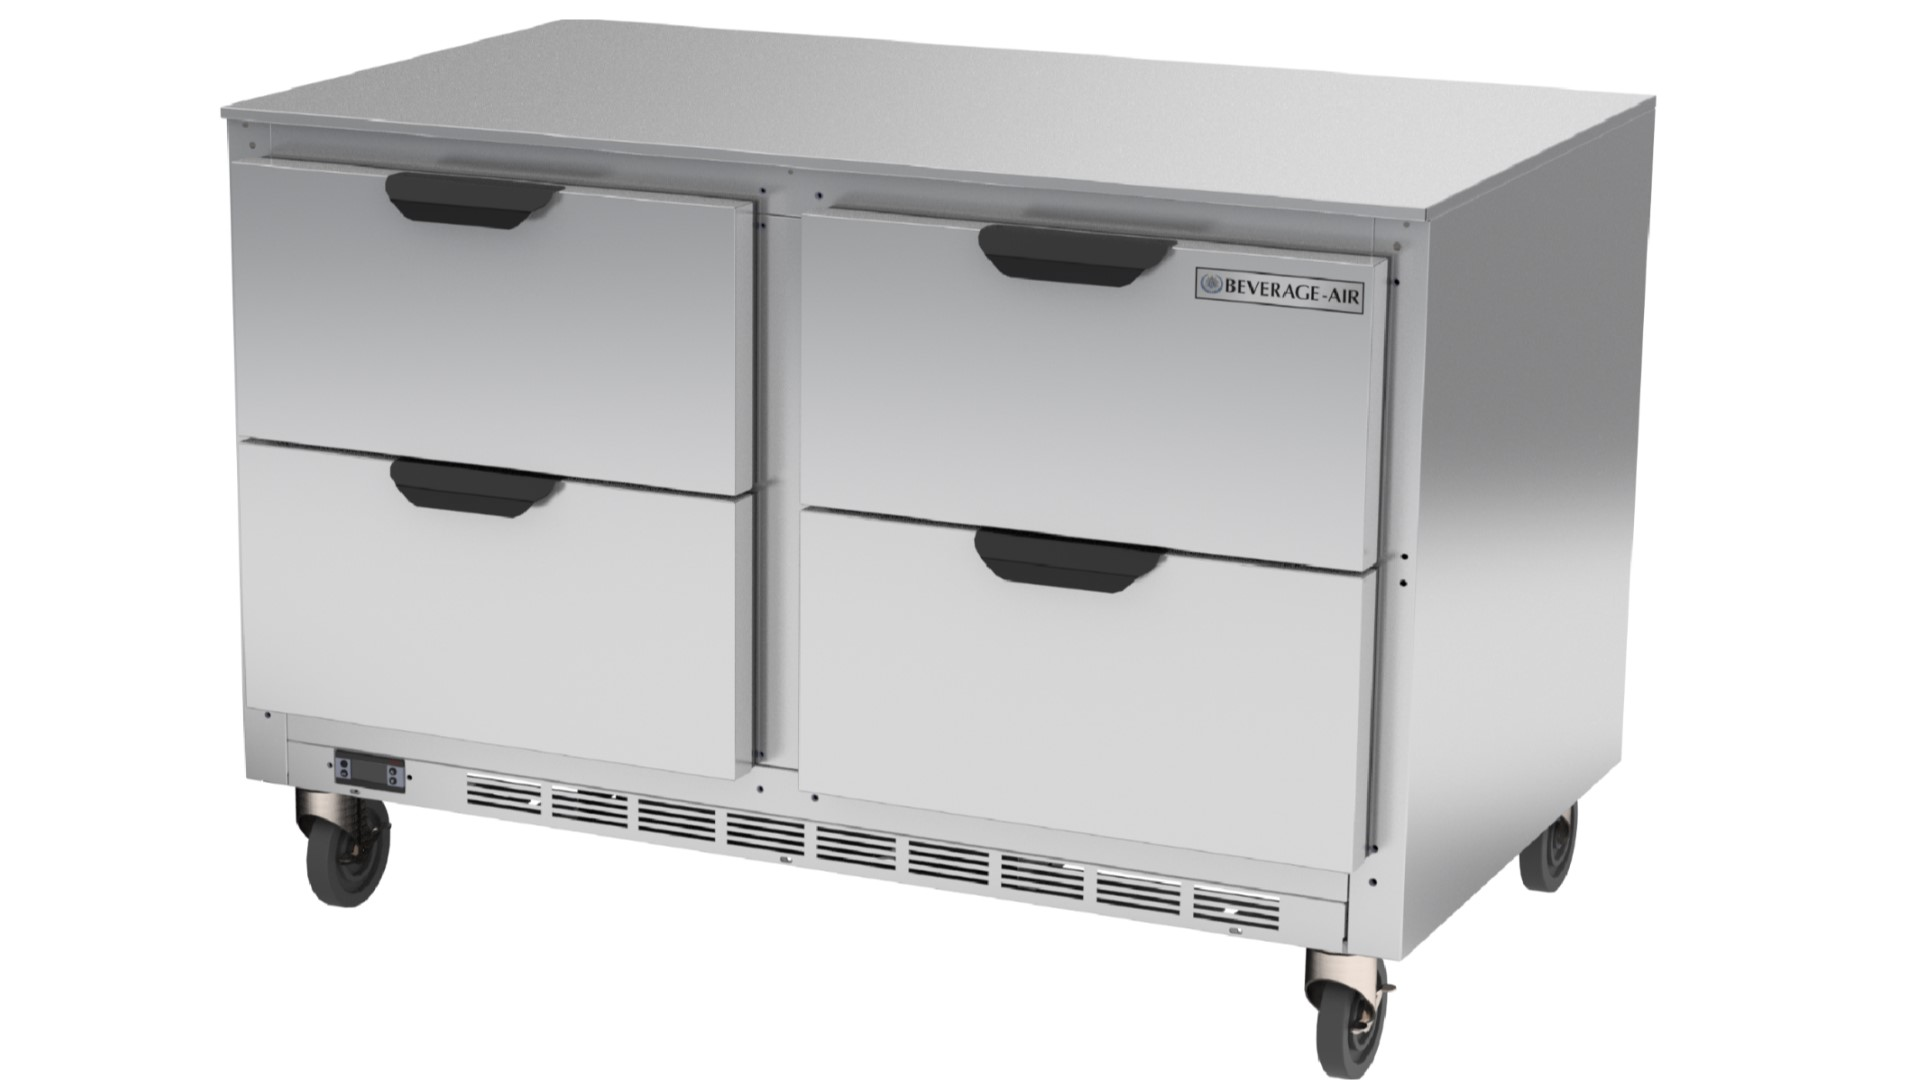 Beverage Air UCFD48AHC-4 Undercounter Freezer 48"